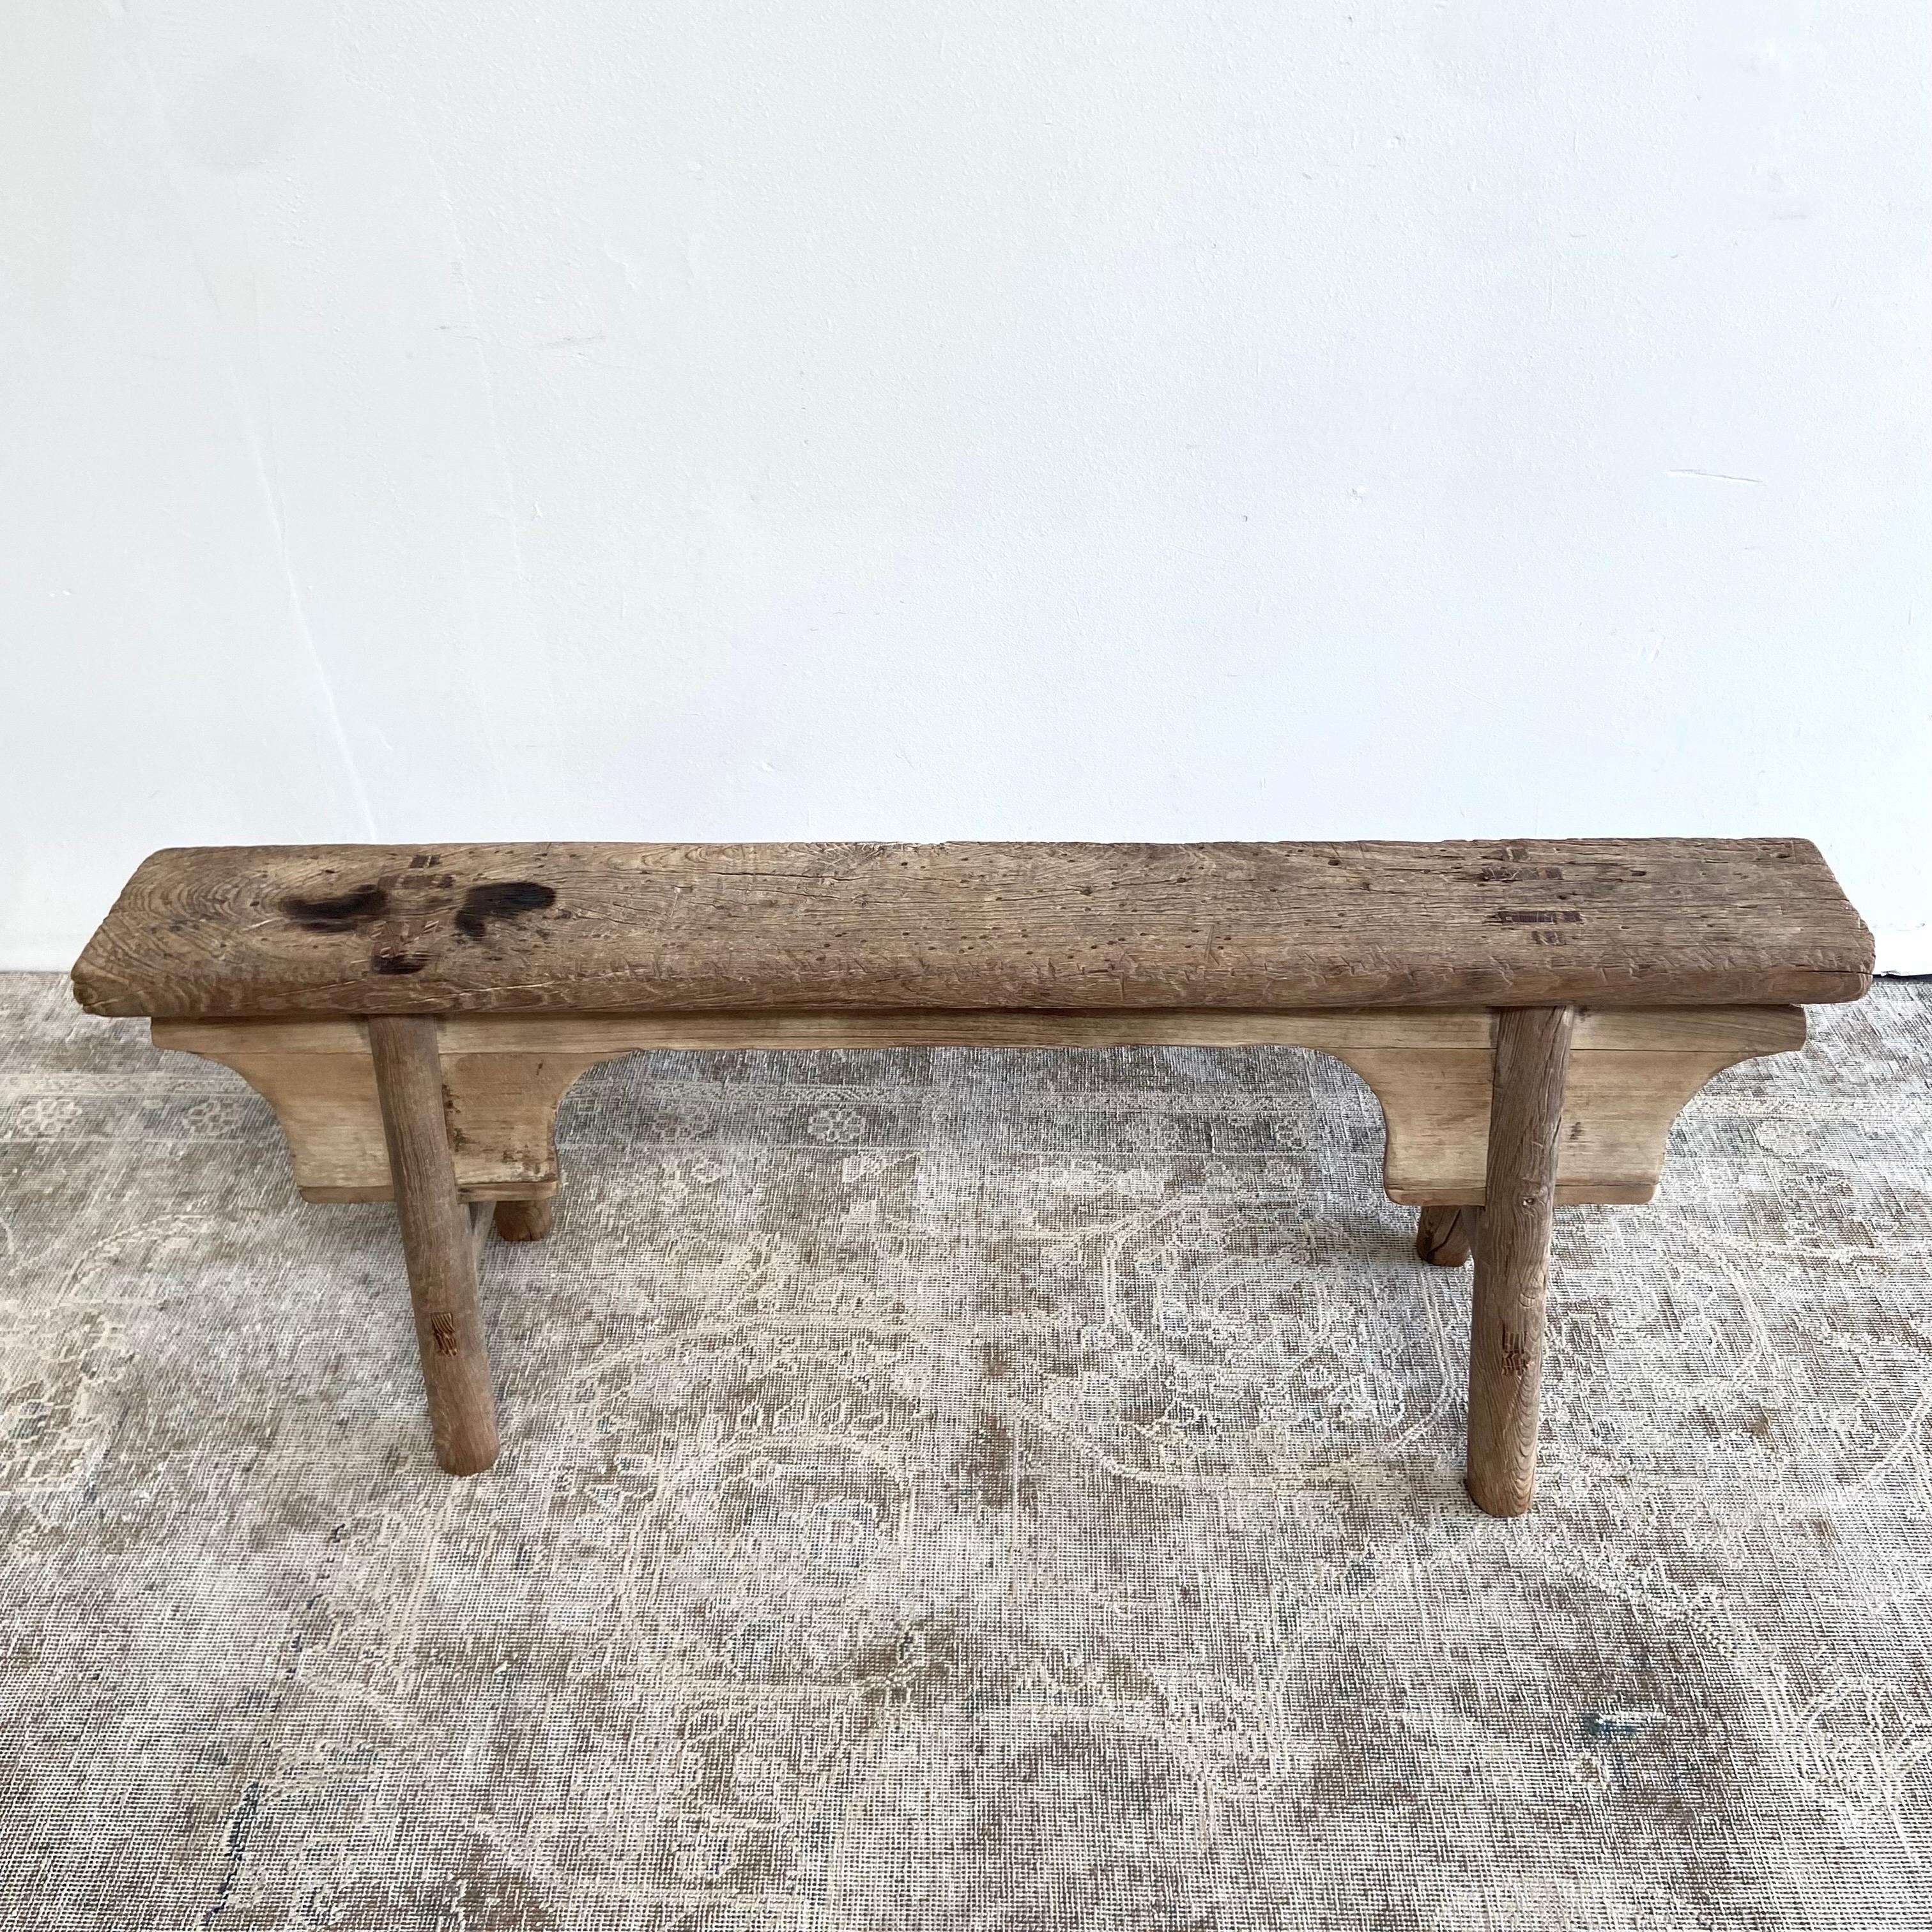 Vintage antique elm wood bench. These are the real vintage antique elm wood benches! Beautiful antique patina, with weathering and age, these are solid and sturdy ready for daily use, use as as a table behind a sofa, stool, coffee table, they are